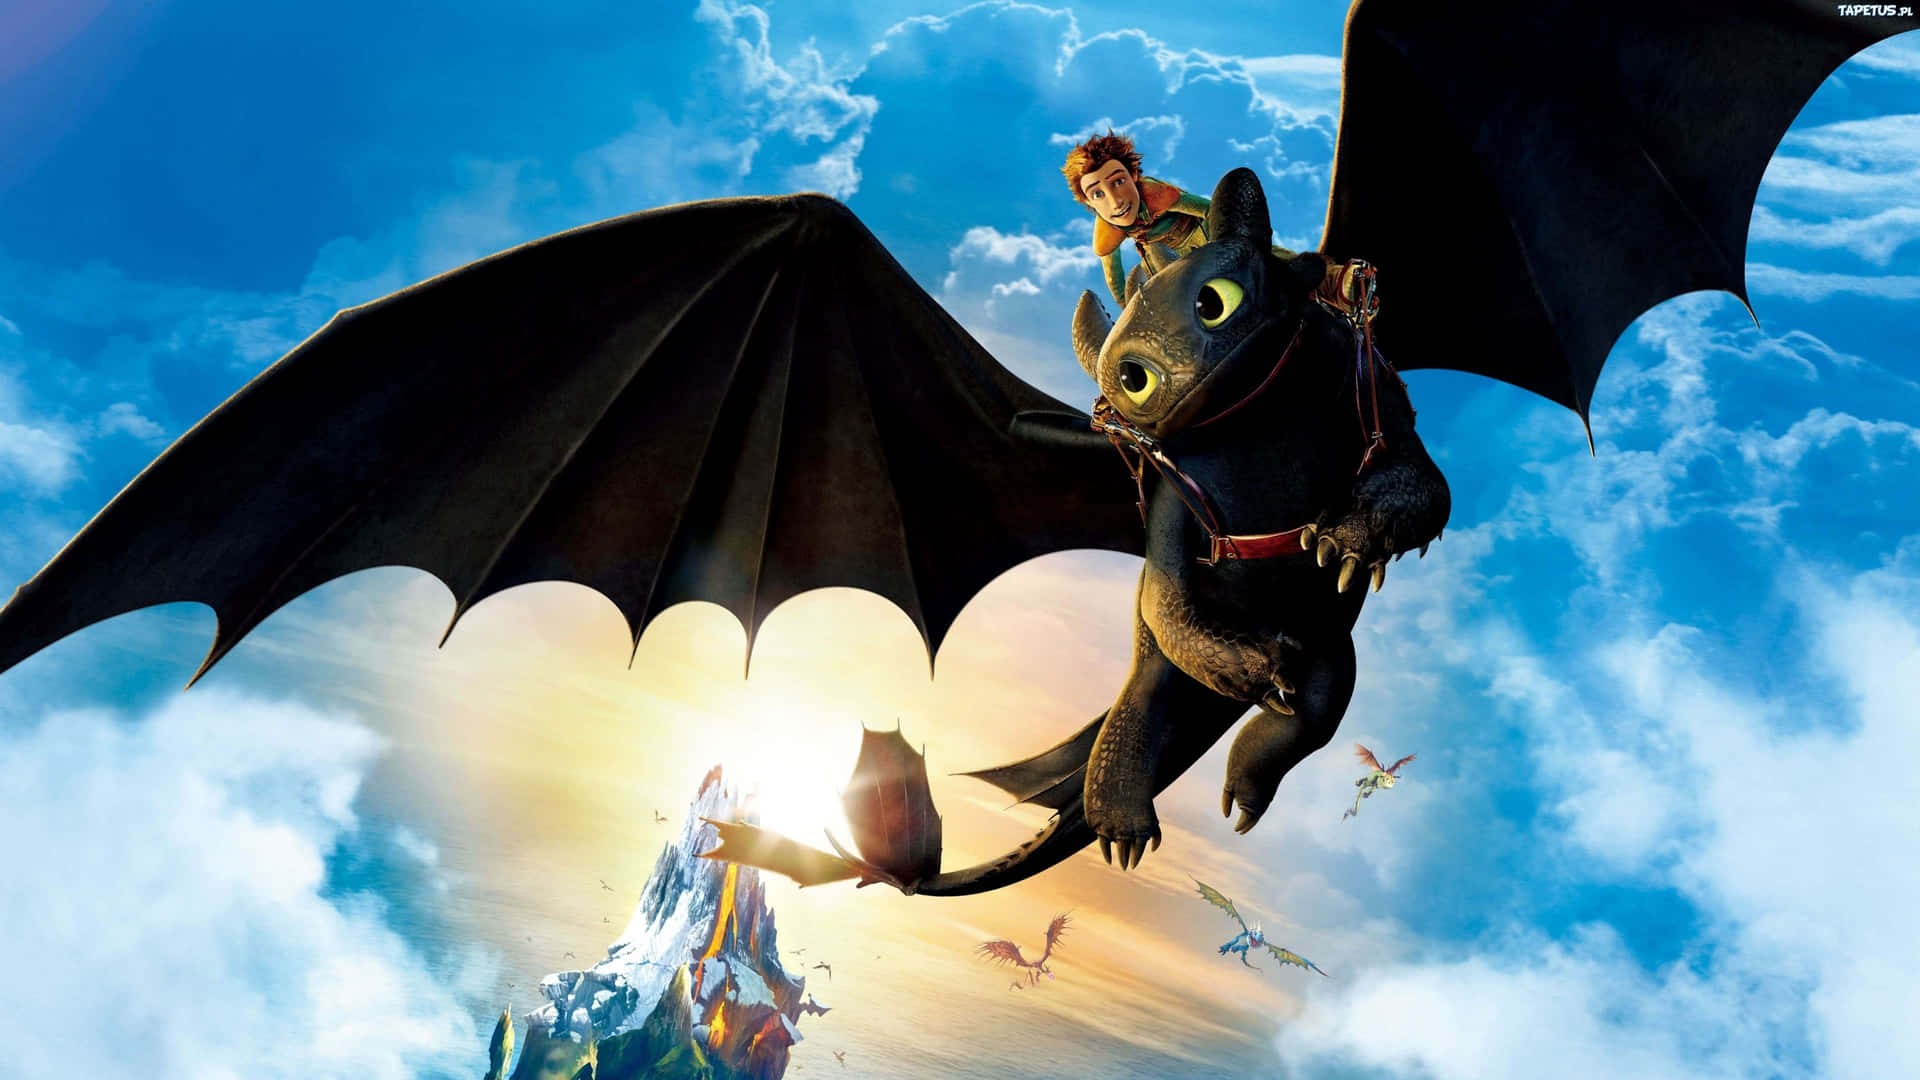 New adventures await in 'How to Train Your Dragon 4k', now streaming! Wallpaper